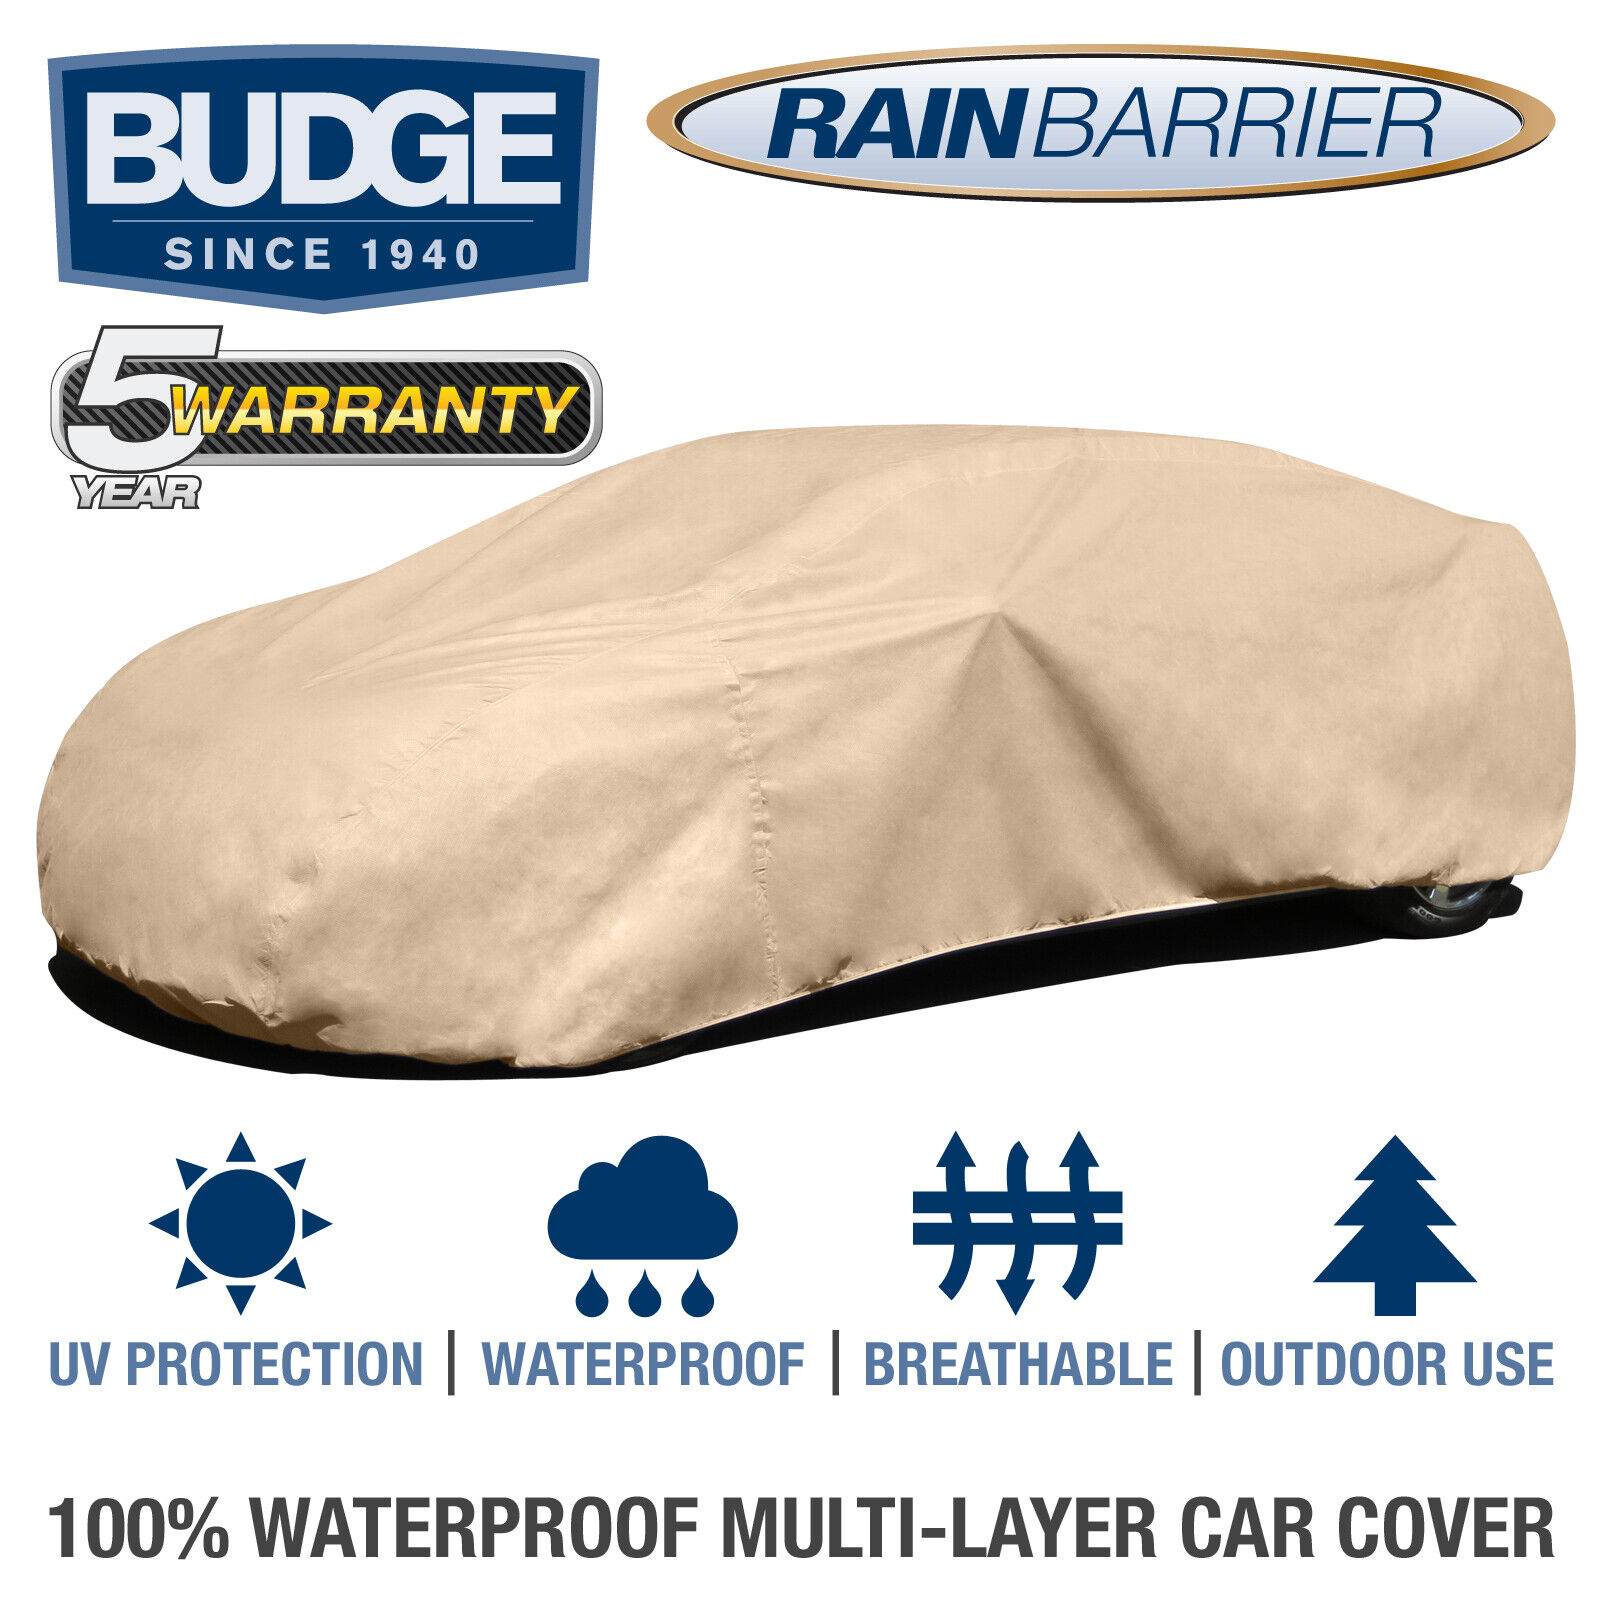 Budge Rain Barrier Car Cover Fits Cadillac Seville 1978| Waterproof | Breathable